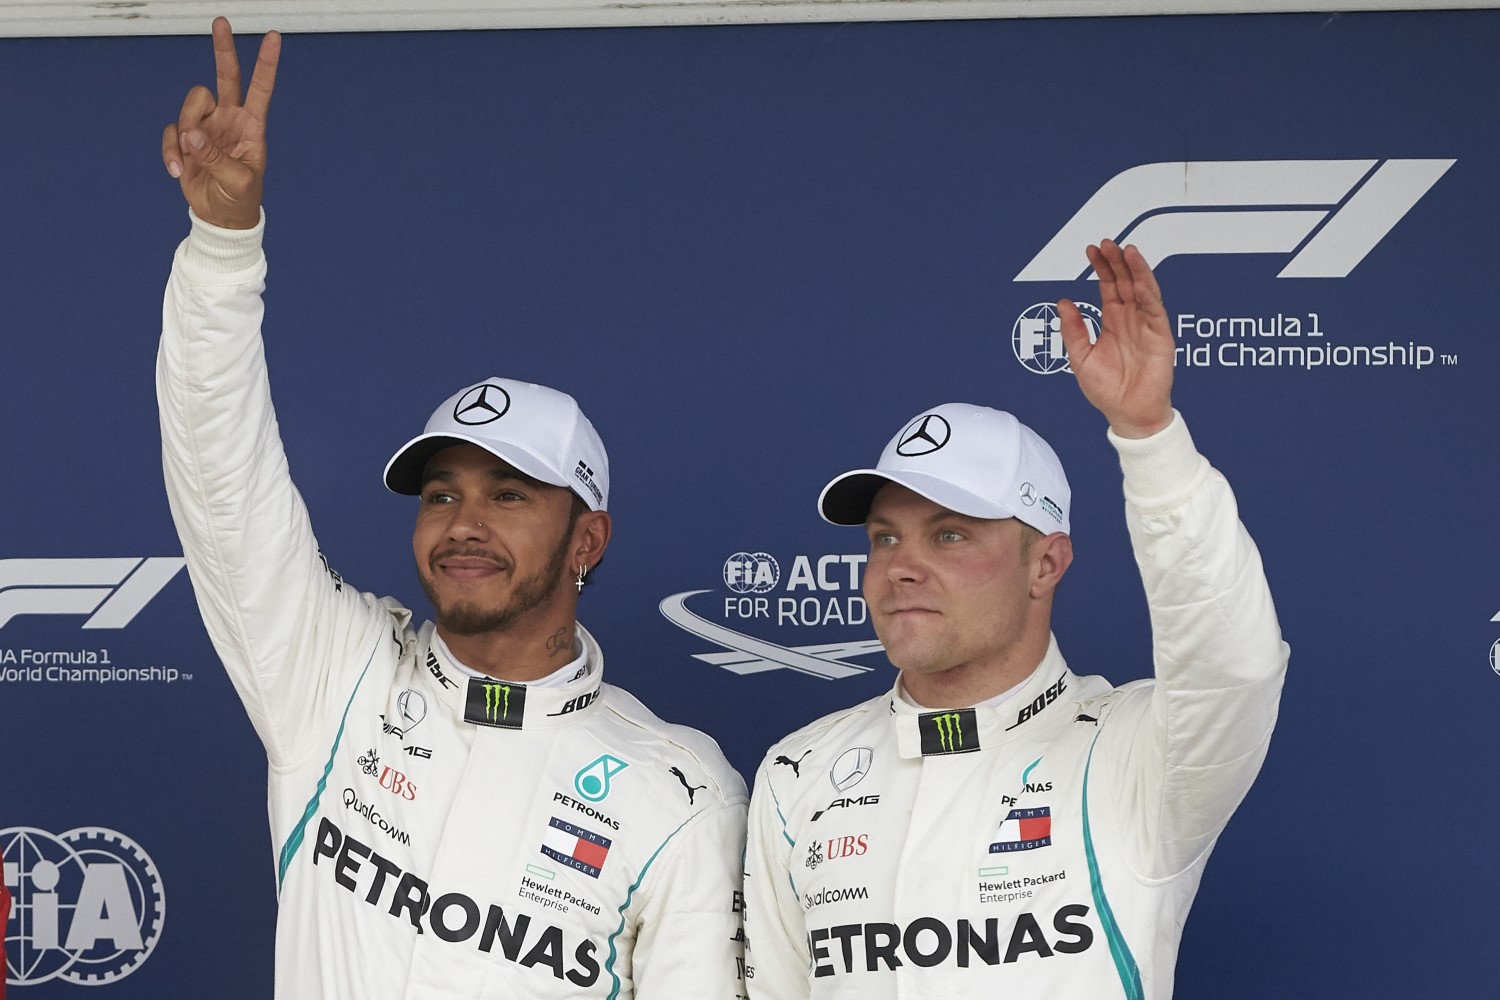 Hamilton (L) and his slave driver Bottas, wave to the crowd in Brazil